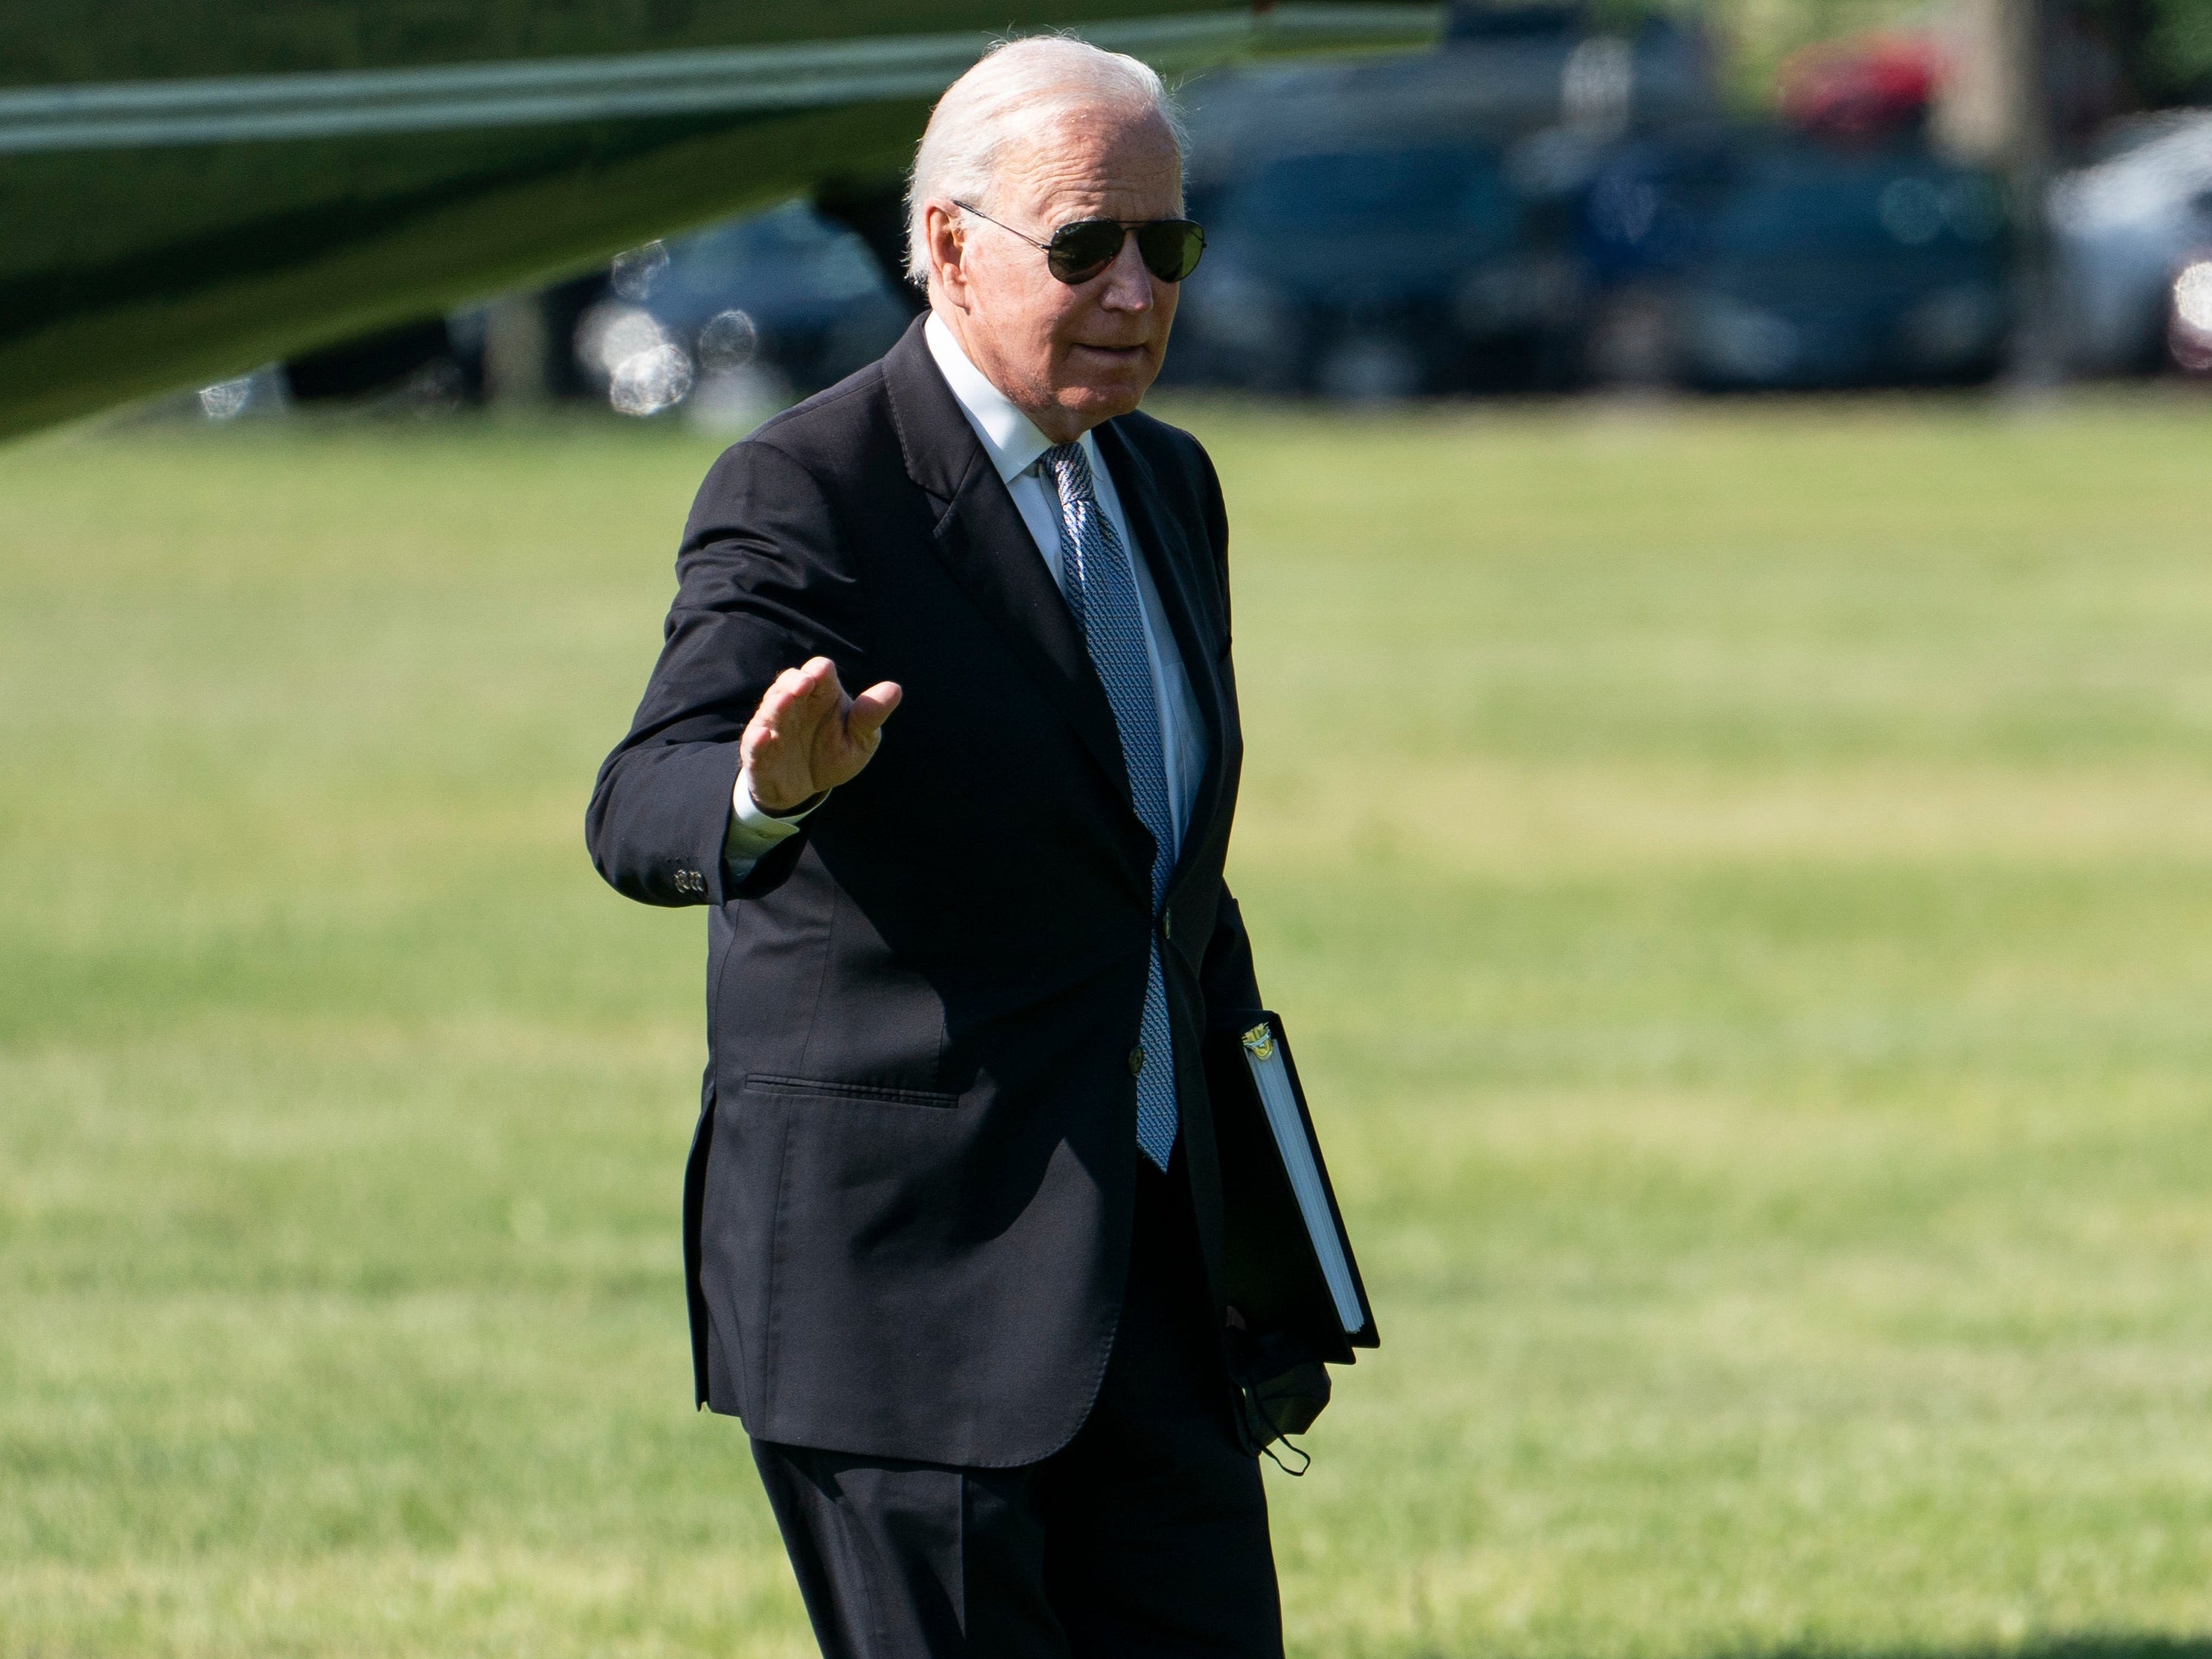 The US president, Joe Biden, arrives at the White House on Monday after spending the weekend at his Delaware home